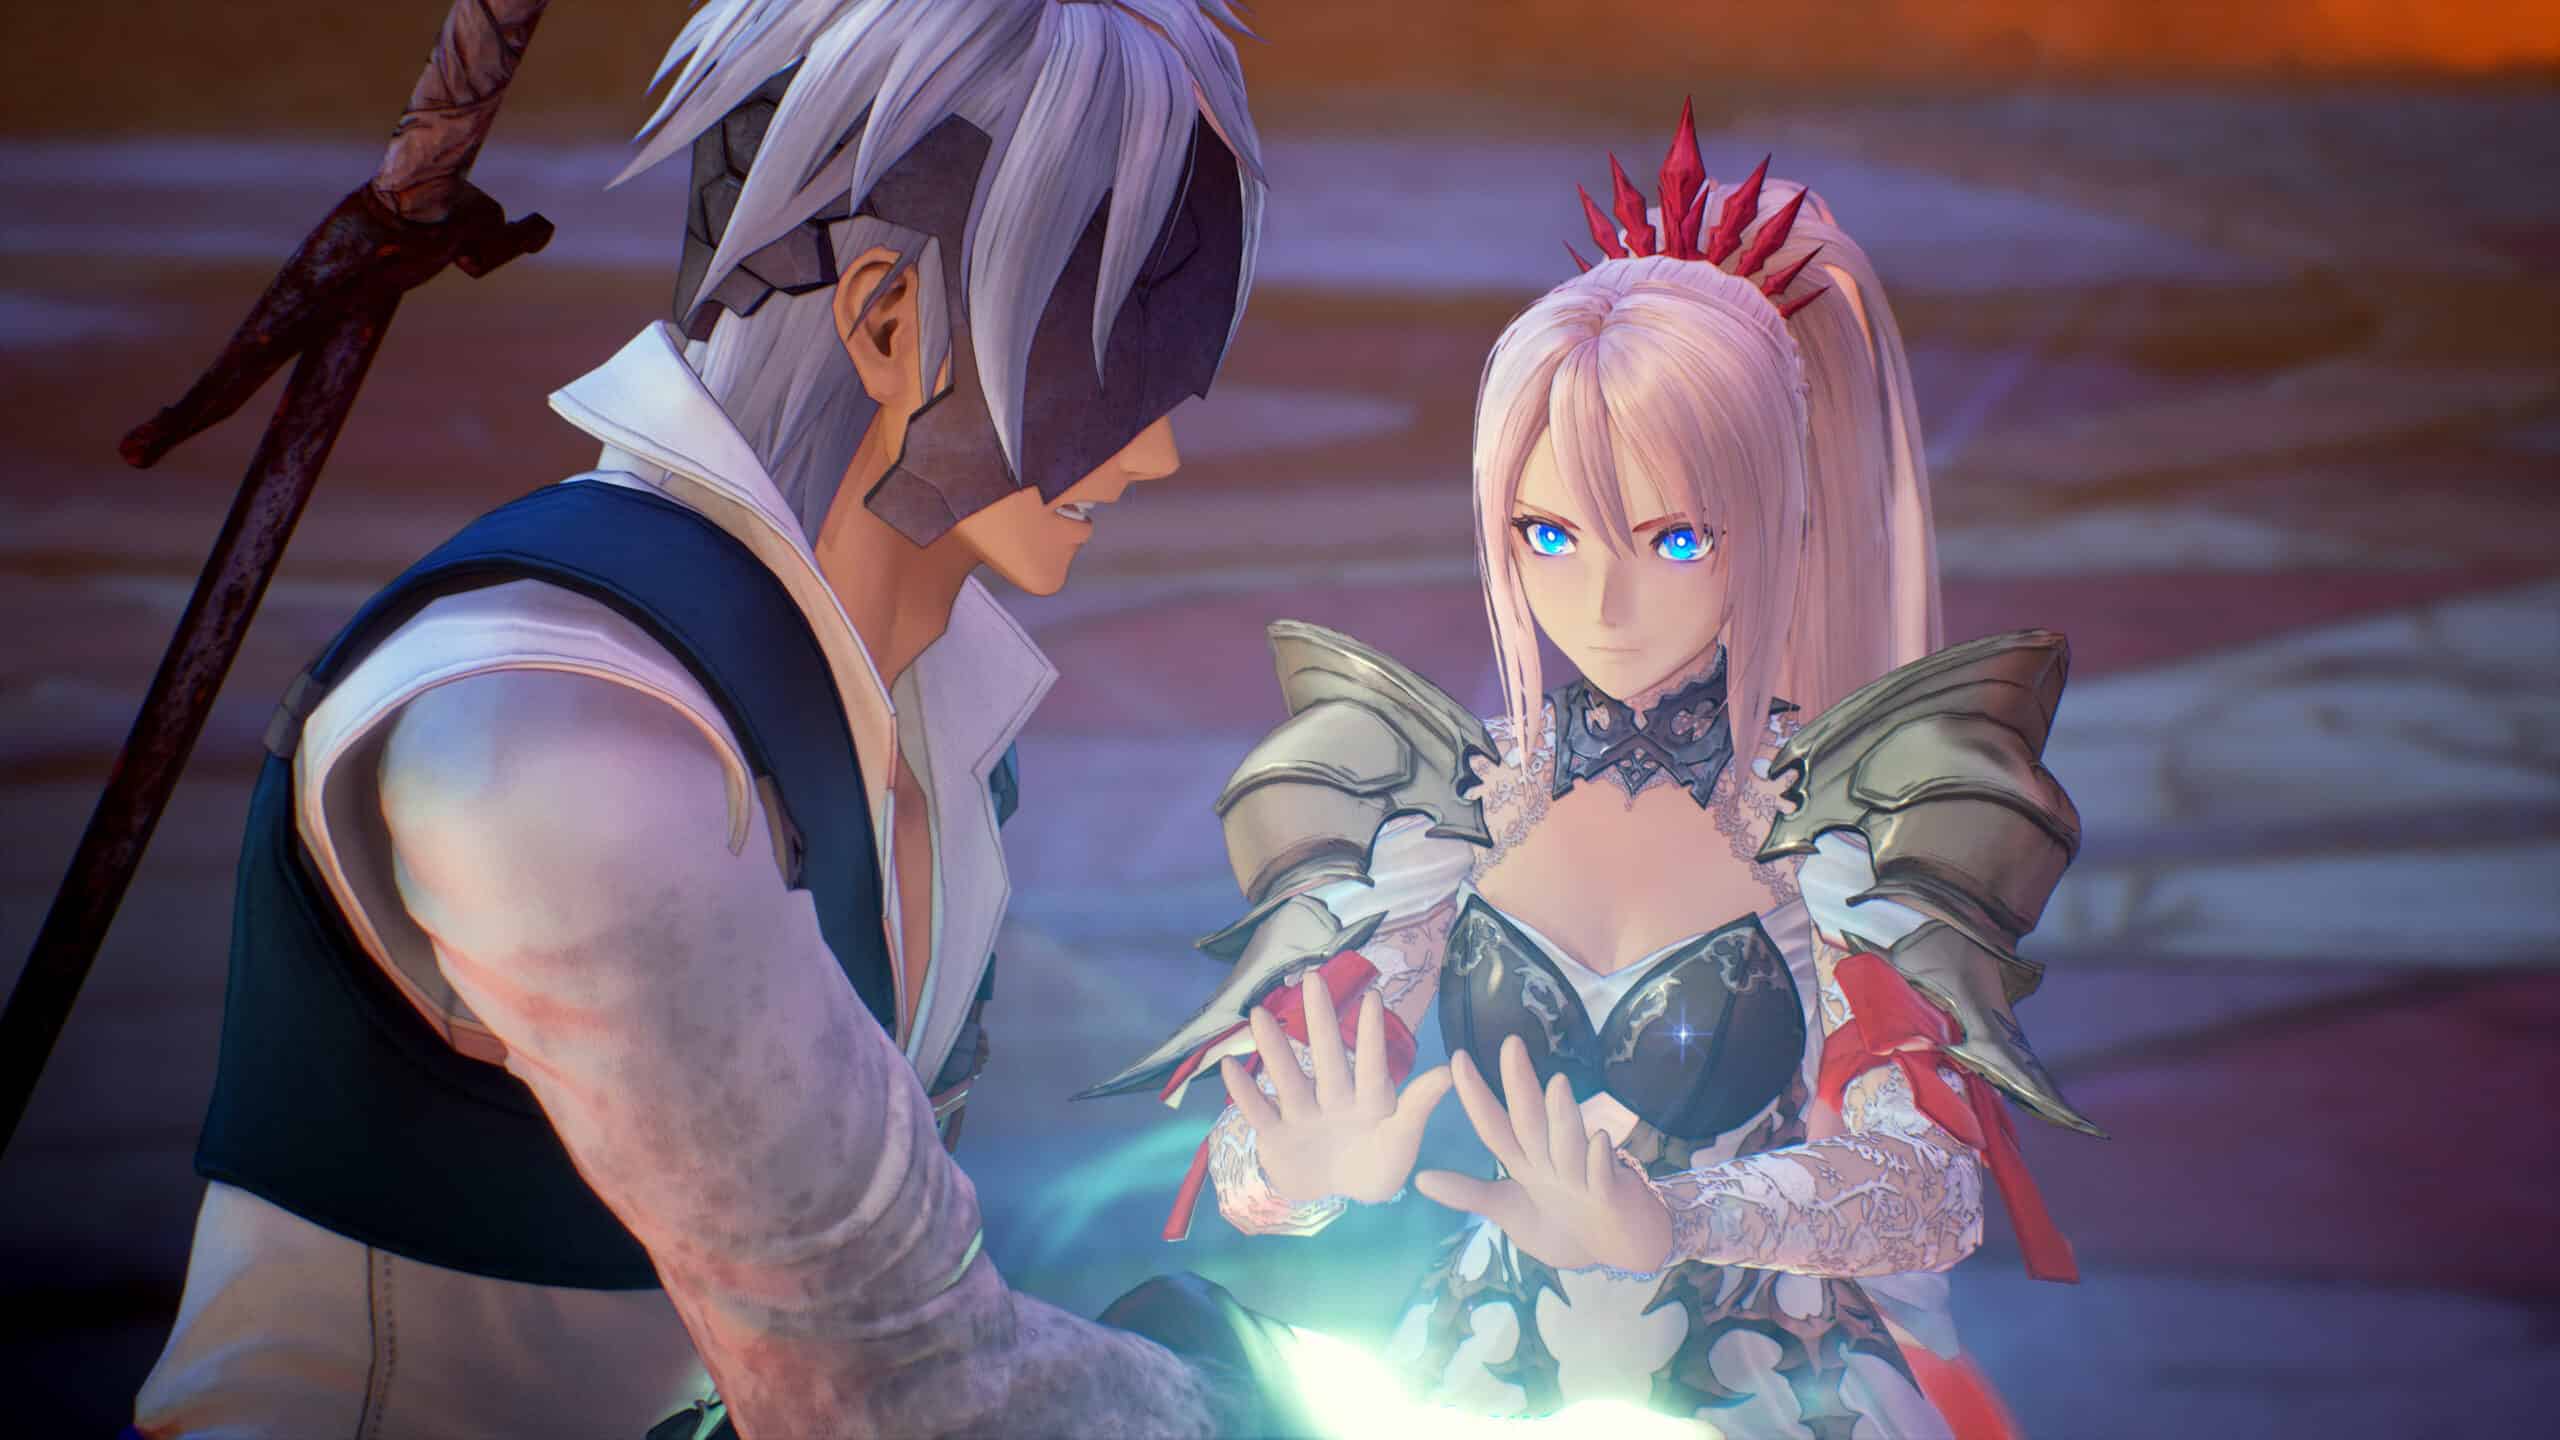 Tales of Arise Continues Themes Seen in Zestiria, Berseria